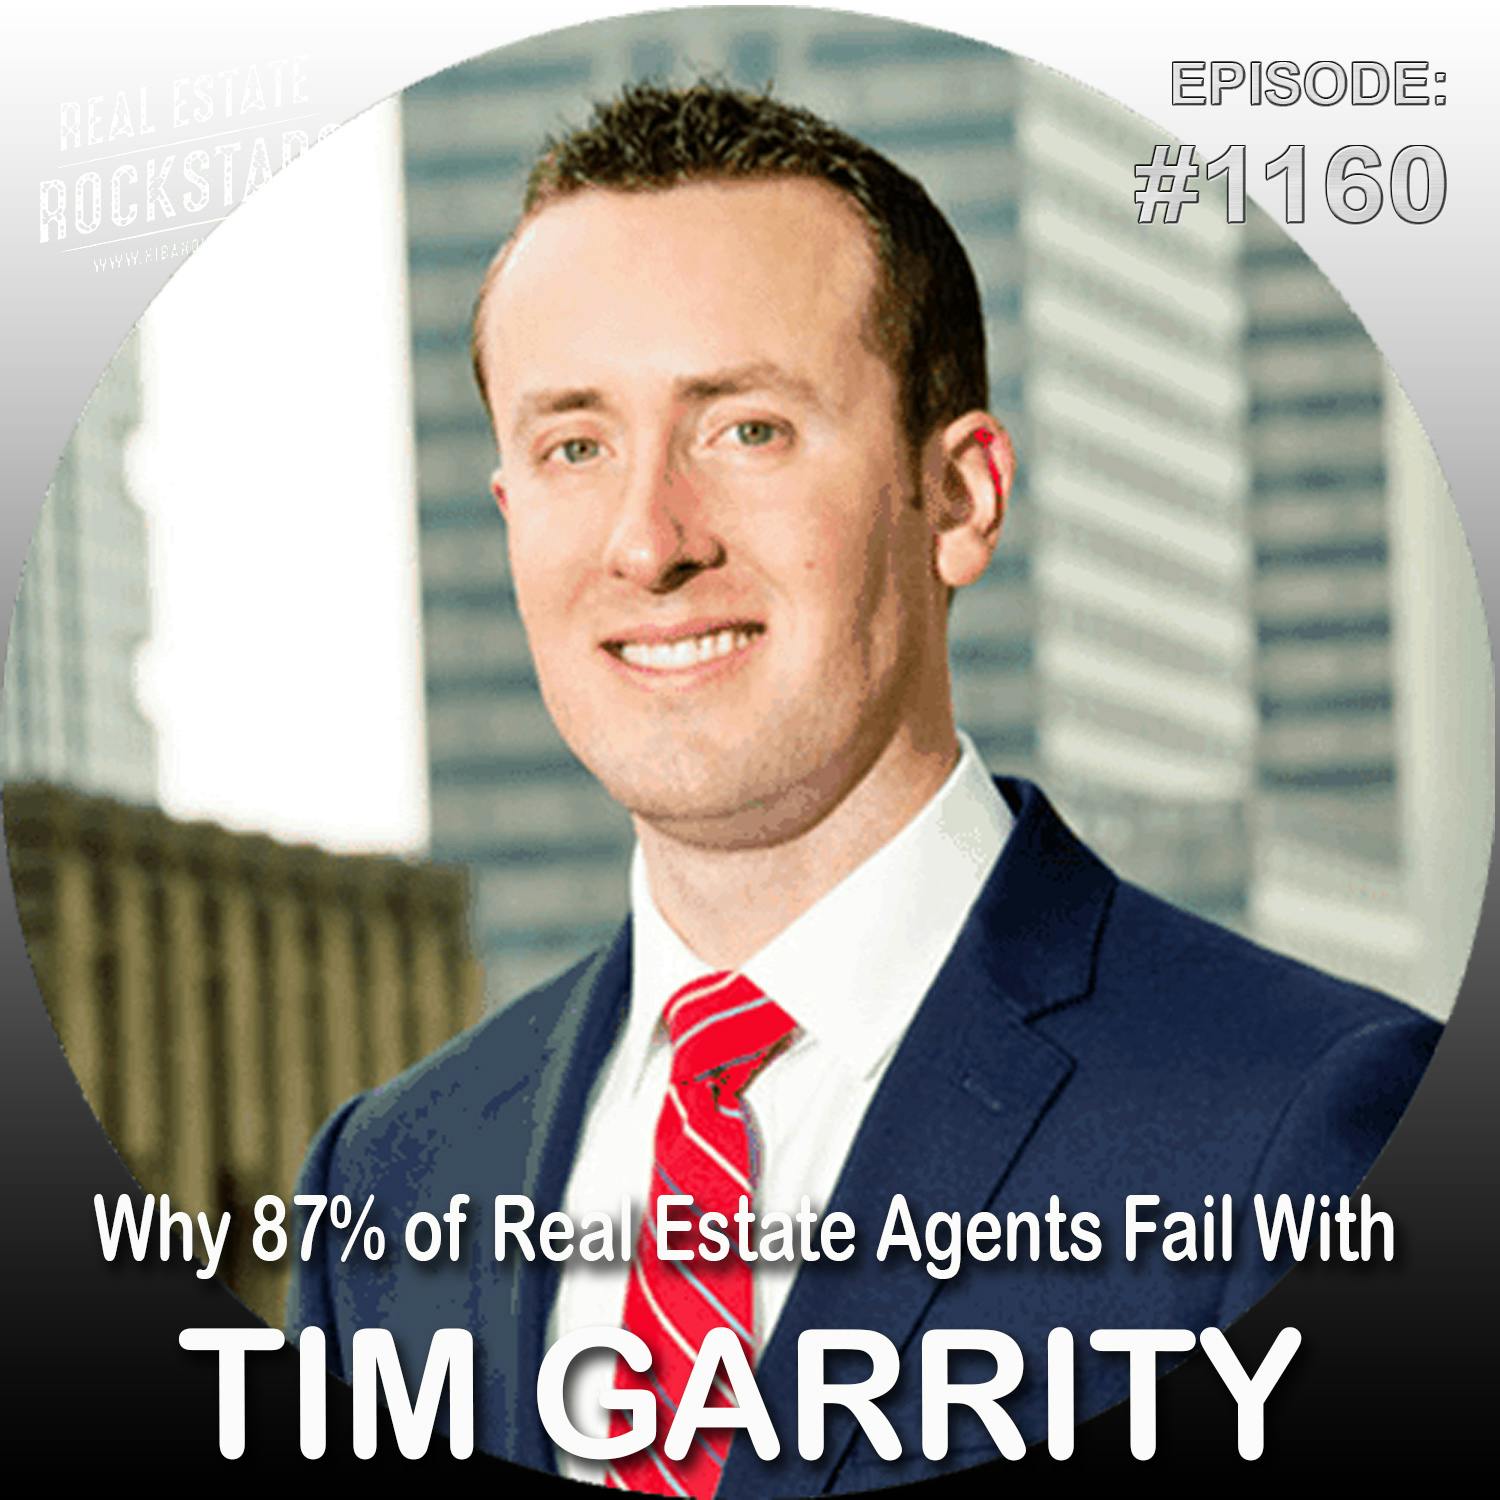 1160: Why 87% of Real Estate Agents Fail With Tim Garrity